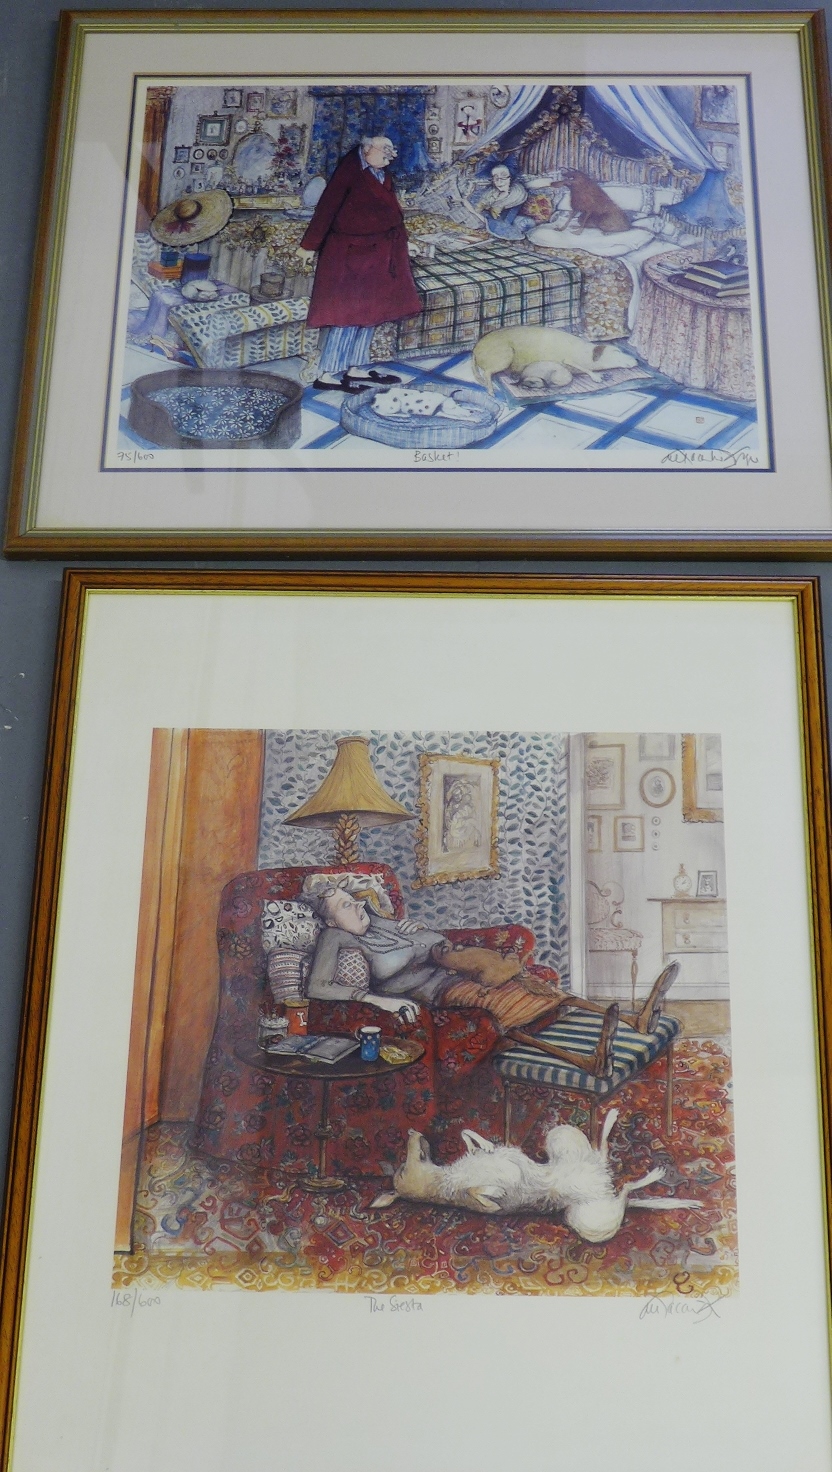 Sue MaCartney-Snape Two limited edition prints ‘The Siesta' 168/600 and 'Basket' 75/600, both pencil